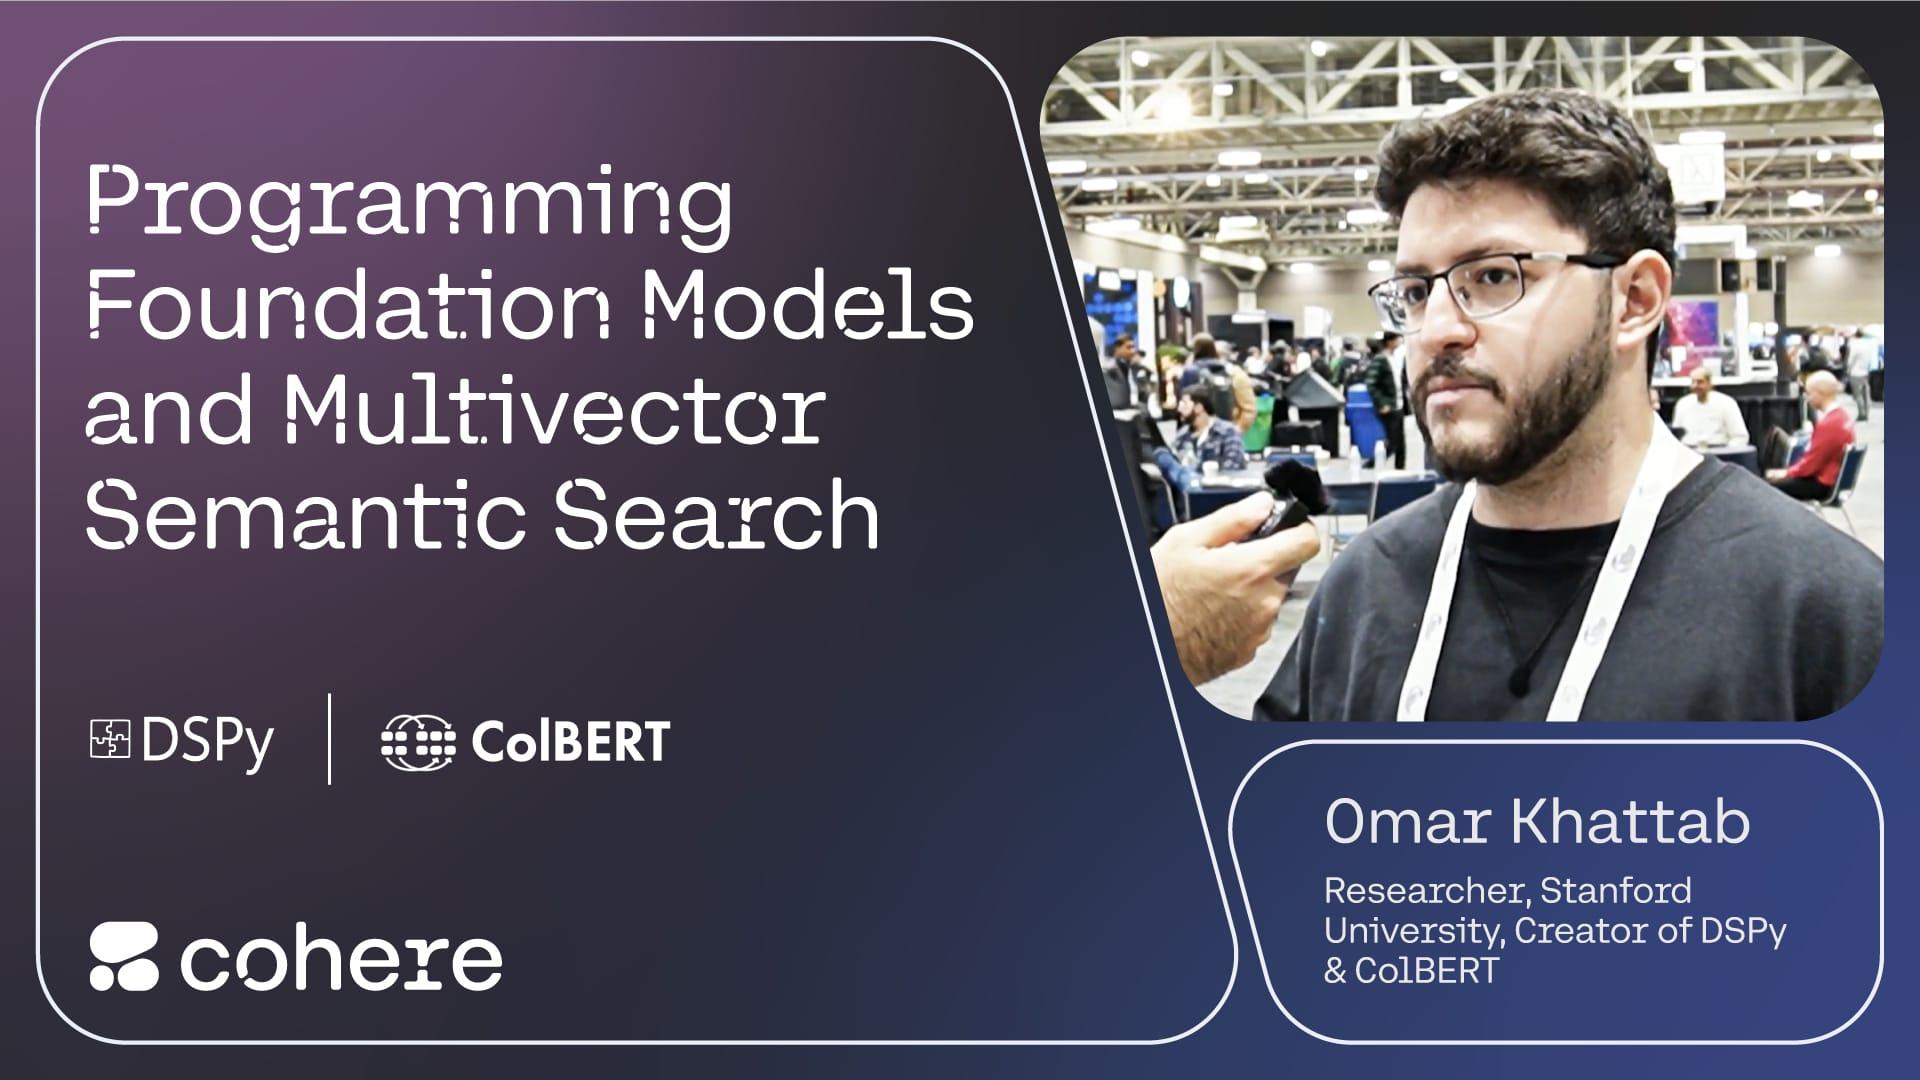 Programming Foundation Models with DSPy and Multivector Semantic Search with ColBERT: An Interview With Omar Khattab